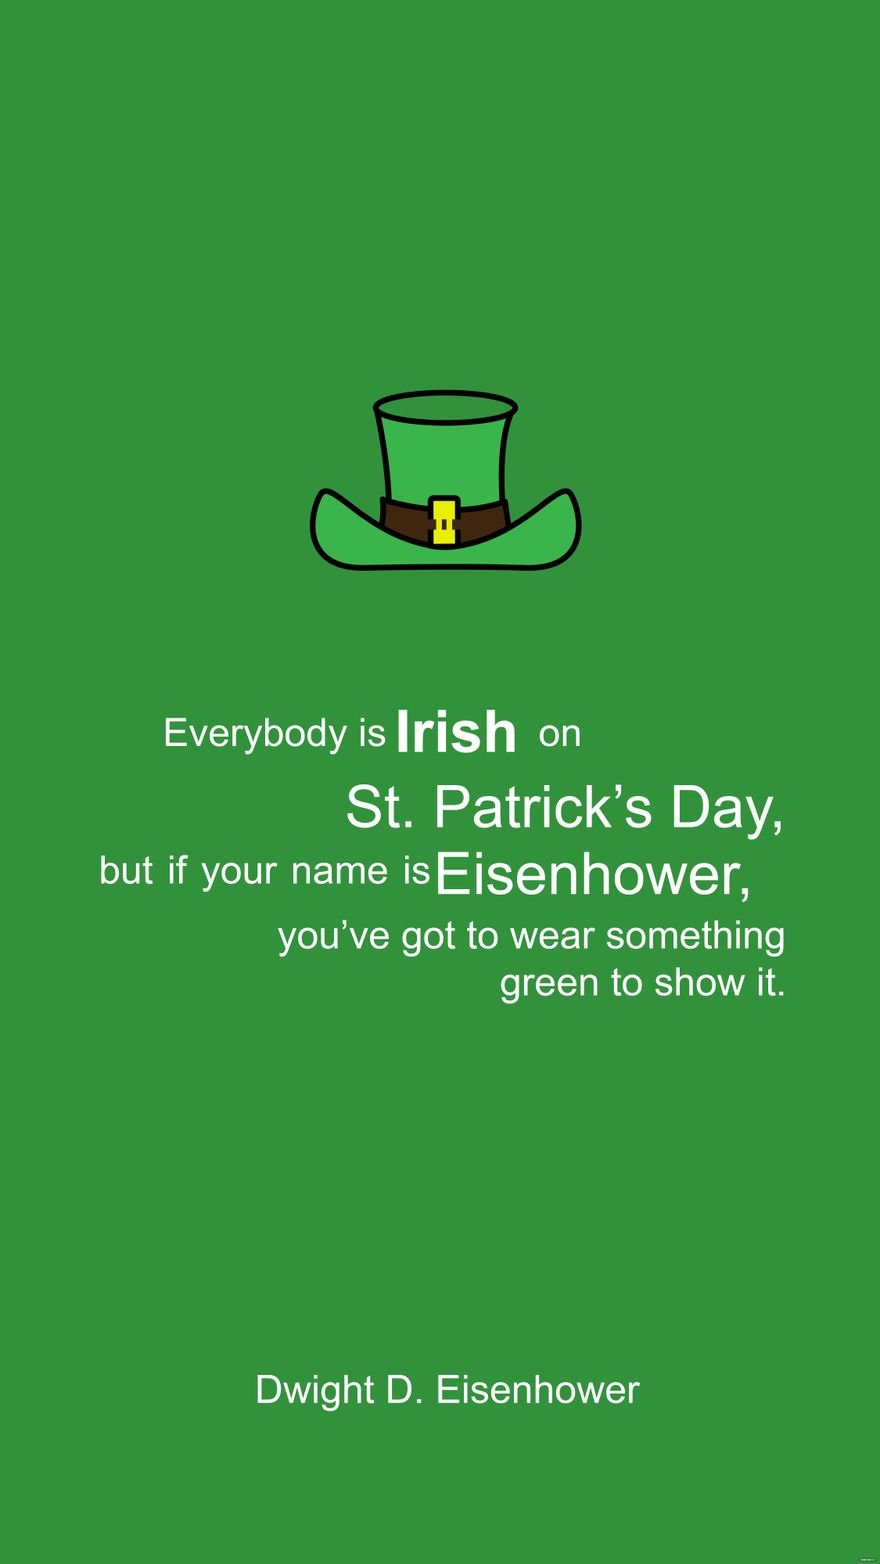 Free Dwight D. Eisenhower - Everybody is Irish on St. Patrick’s Day, but if your name is Eisenhower, you’ve got to wear something green to show it. in JPEG